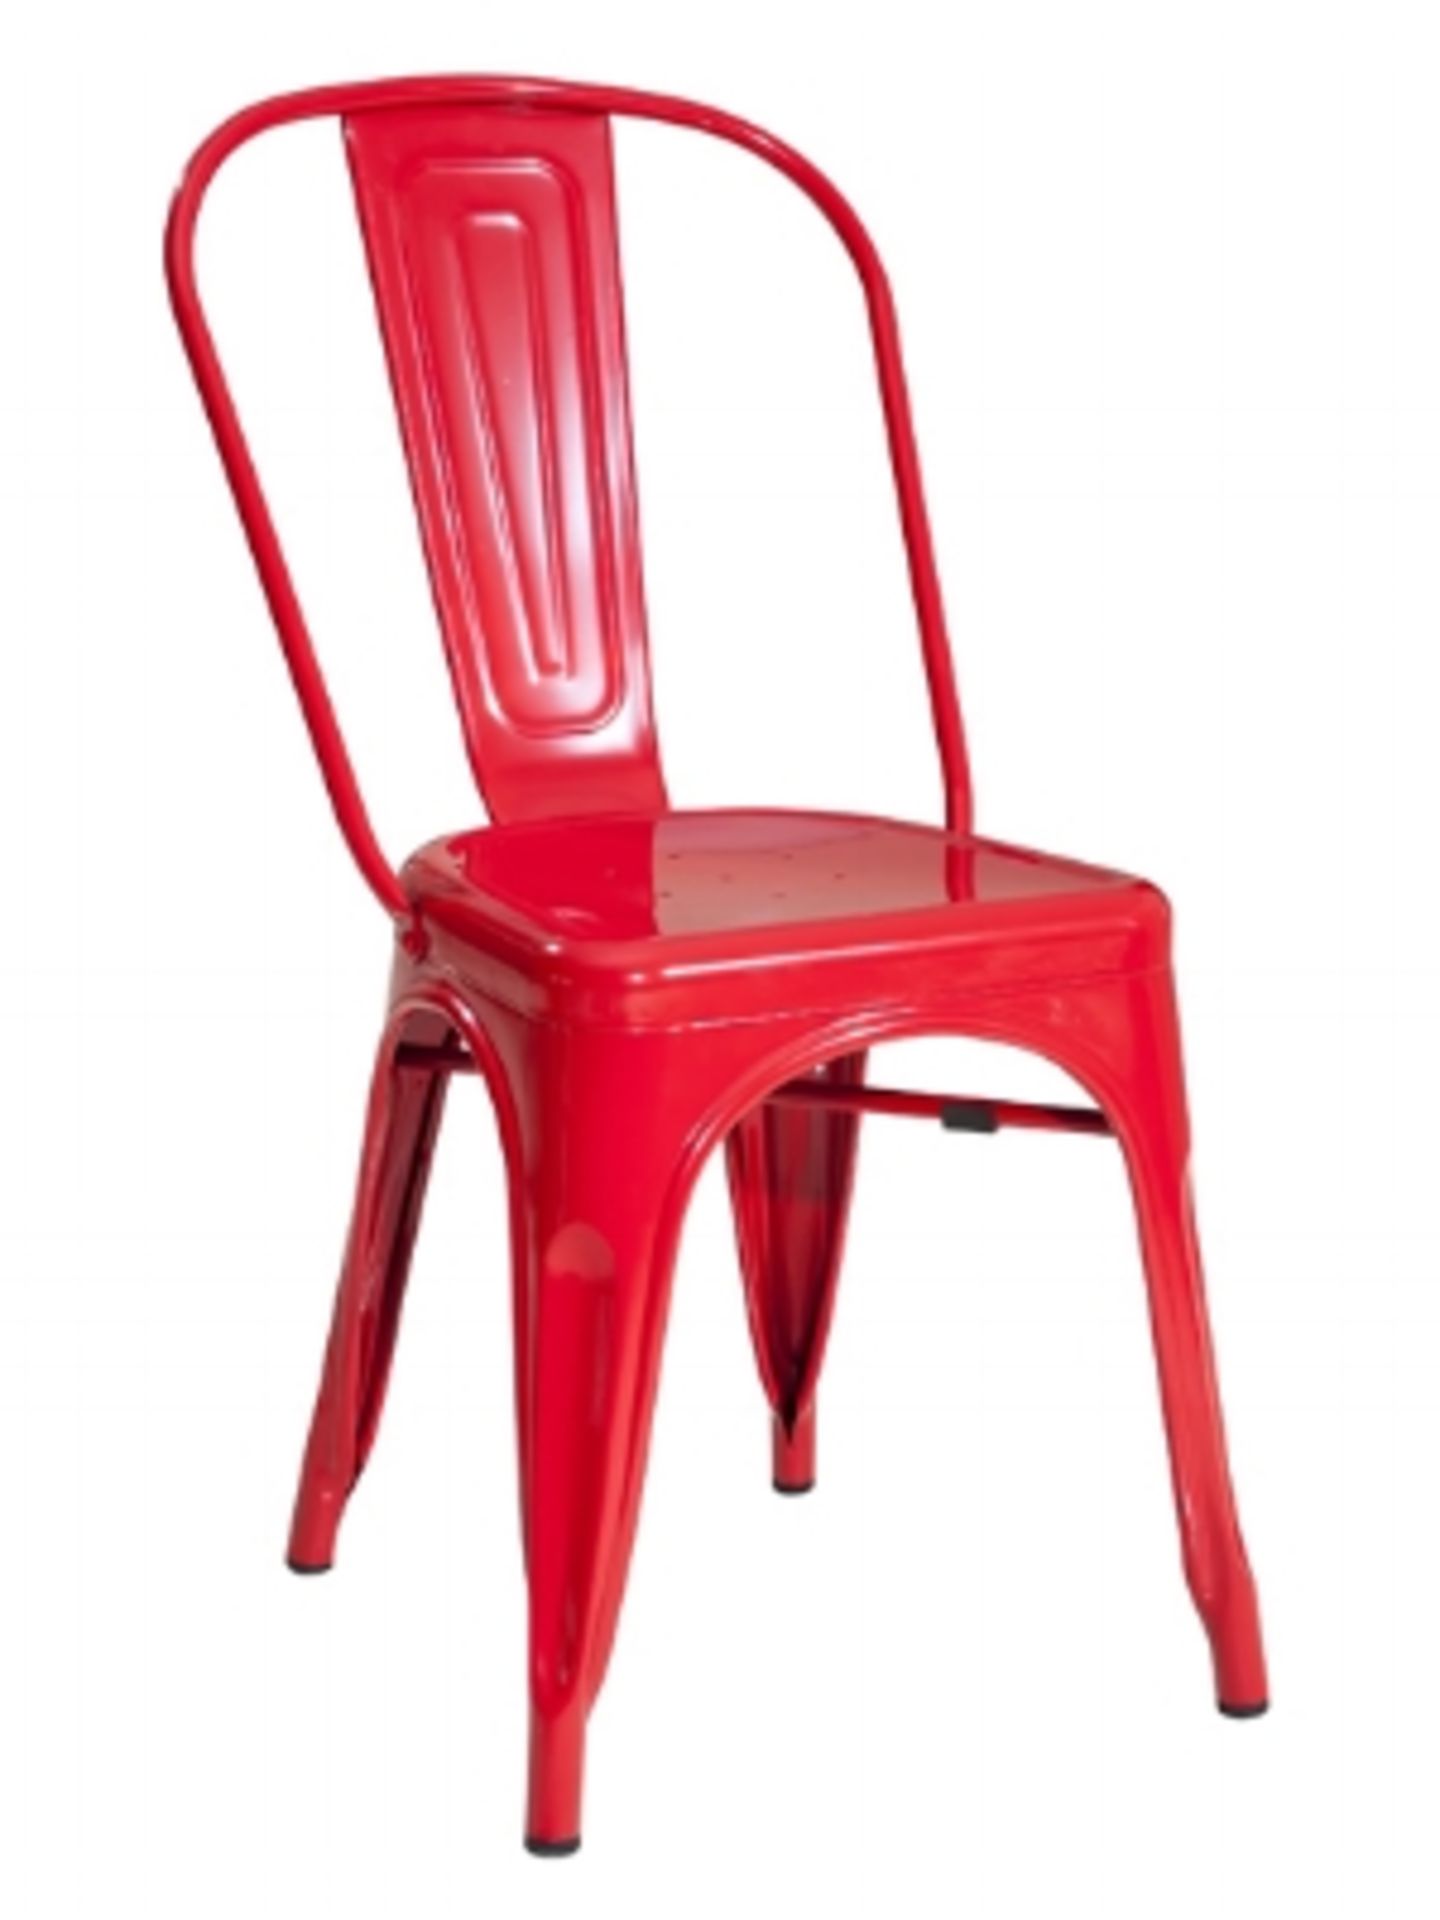 Manhattan Side Chair- Red with Back, T-5816. Powder Coated epoxy finish on e-coated steel, or